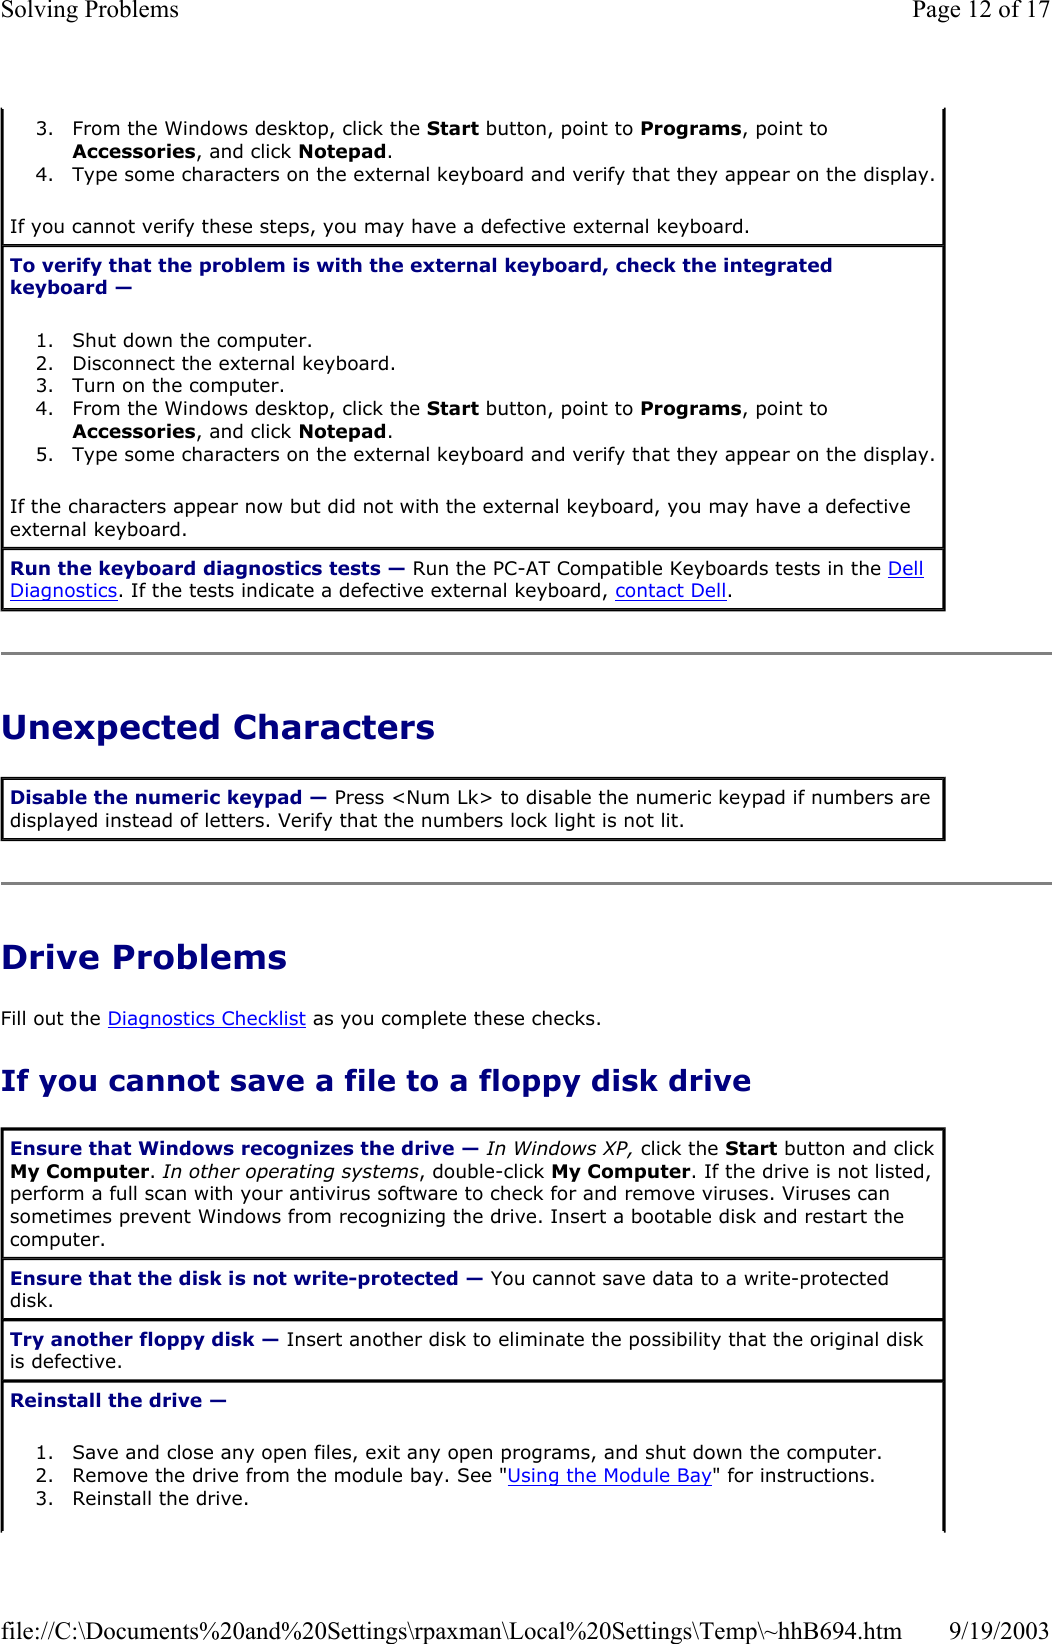 Unexpected Characters Drive Problems Fill out the Diagnostics Checklist as you complete these checks. If you cannot save a file to a floppy disk drive 3. From the Windows desktop, click the Start button, point to Programs, point to Accessories, and click Notepad.  4. Type some characters on the external keyboard and verify that they appear on the display. If you cannot verify these steps, you may have a defective external keyboard.  To verify that the problem is with the external keyboard, check the integrated keyboard —  1. Shut down the computer.  2. Disconnect the external keyboard.  3. Turn on the computer.  4. From the Windows desktop, click the Start button, point to Programs, point to Accessories, and click Notepad.  5. Type some characters on the external keyboard and verify that they appear on the display. If the characters appear now but did not with the external keyboard, you may have a defective external keyboard.  Run the keyboard diagnostics tests — Run the PC-AT Compatible Keyboards tests in the Dell Diagnostics. If the tests indicate a defective external keyboard, contact Dell. Disable the numeric keypad — Press &lt;Num Lk&gt; to disable the numeric keypad if numbers are displayed instead of letters. Verify that the numbers lock light is not lit. Ensure that Windows recognizes the drive — In Windows XP, click the Start button and click My Computer. In other operating systems, double-click My Computer. If the drive is not listed, perform a full scan with your antivirus software to check for and remove viruses. Viruses can sometimes prevent Windows from recognizing the drive. Insert a bootable disk and restart the computer. Ensure that the disk is not write-protected — You cannot save data to a write-protected disk.  Try another floppy disk — Insert another disk to eliminate the possibility that the original disk is defective. Reinstall the drive —  1. Save and close any open files, exit any open programs, and shut down the computer.  2. Remove the drive from the module bay. See &quot;Using the Module Bay&quot; for instructions.  3. Reinstall the drive.  Page 12 of 17Solving Problems9/19/2003file://C:\Documents%20and%20Settings\rpaxman\Local%20Settings\Temp\~hhB694.htm